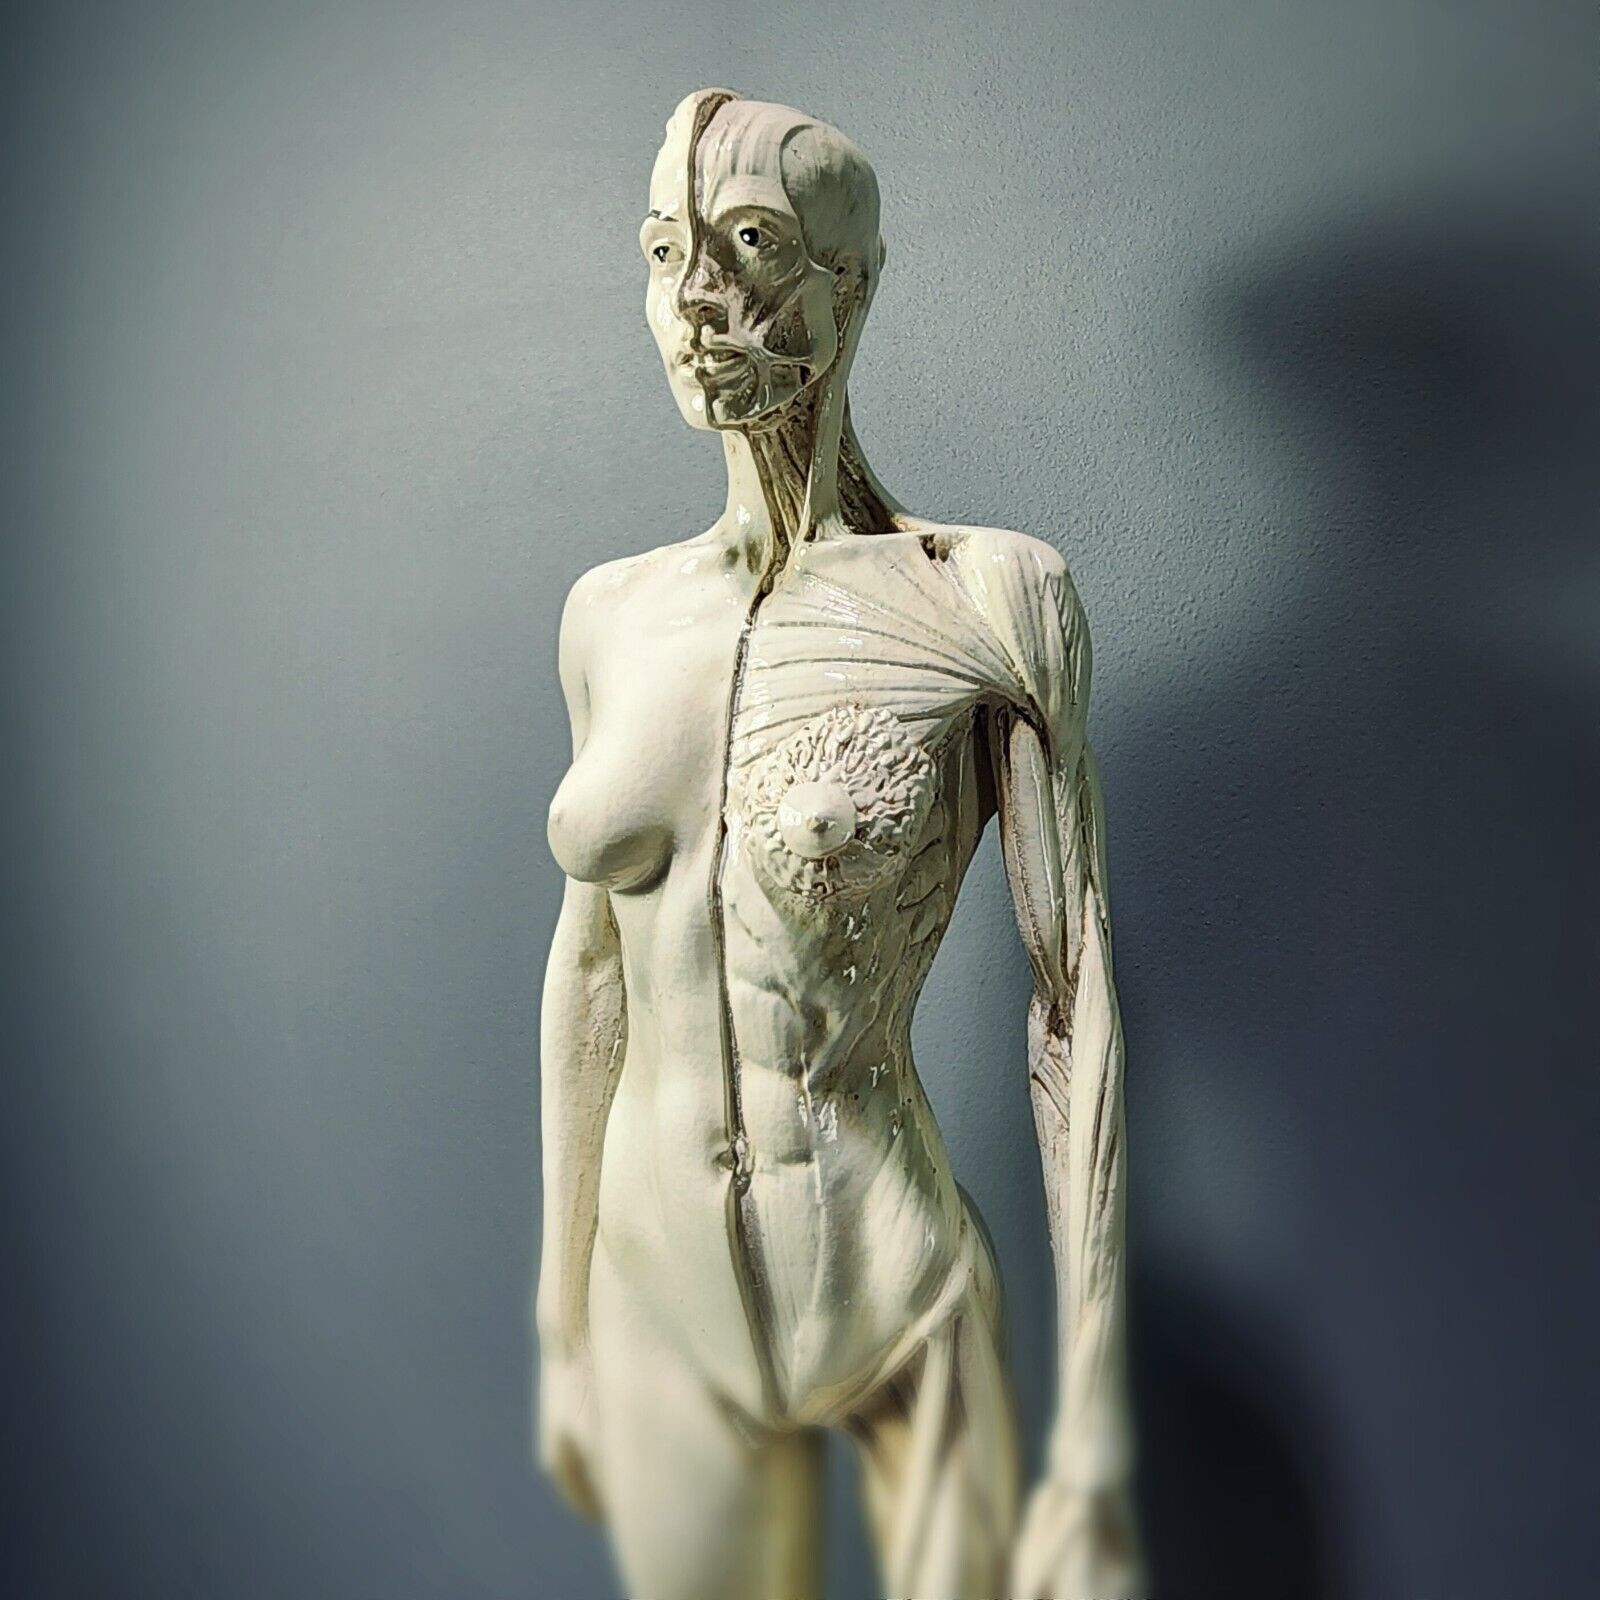 Anatomical Female Medical Model with Muscles, Oddities Curiosities